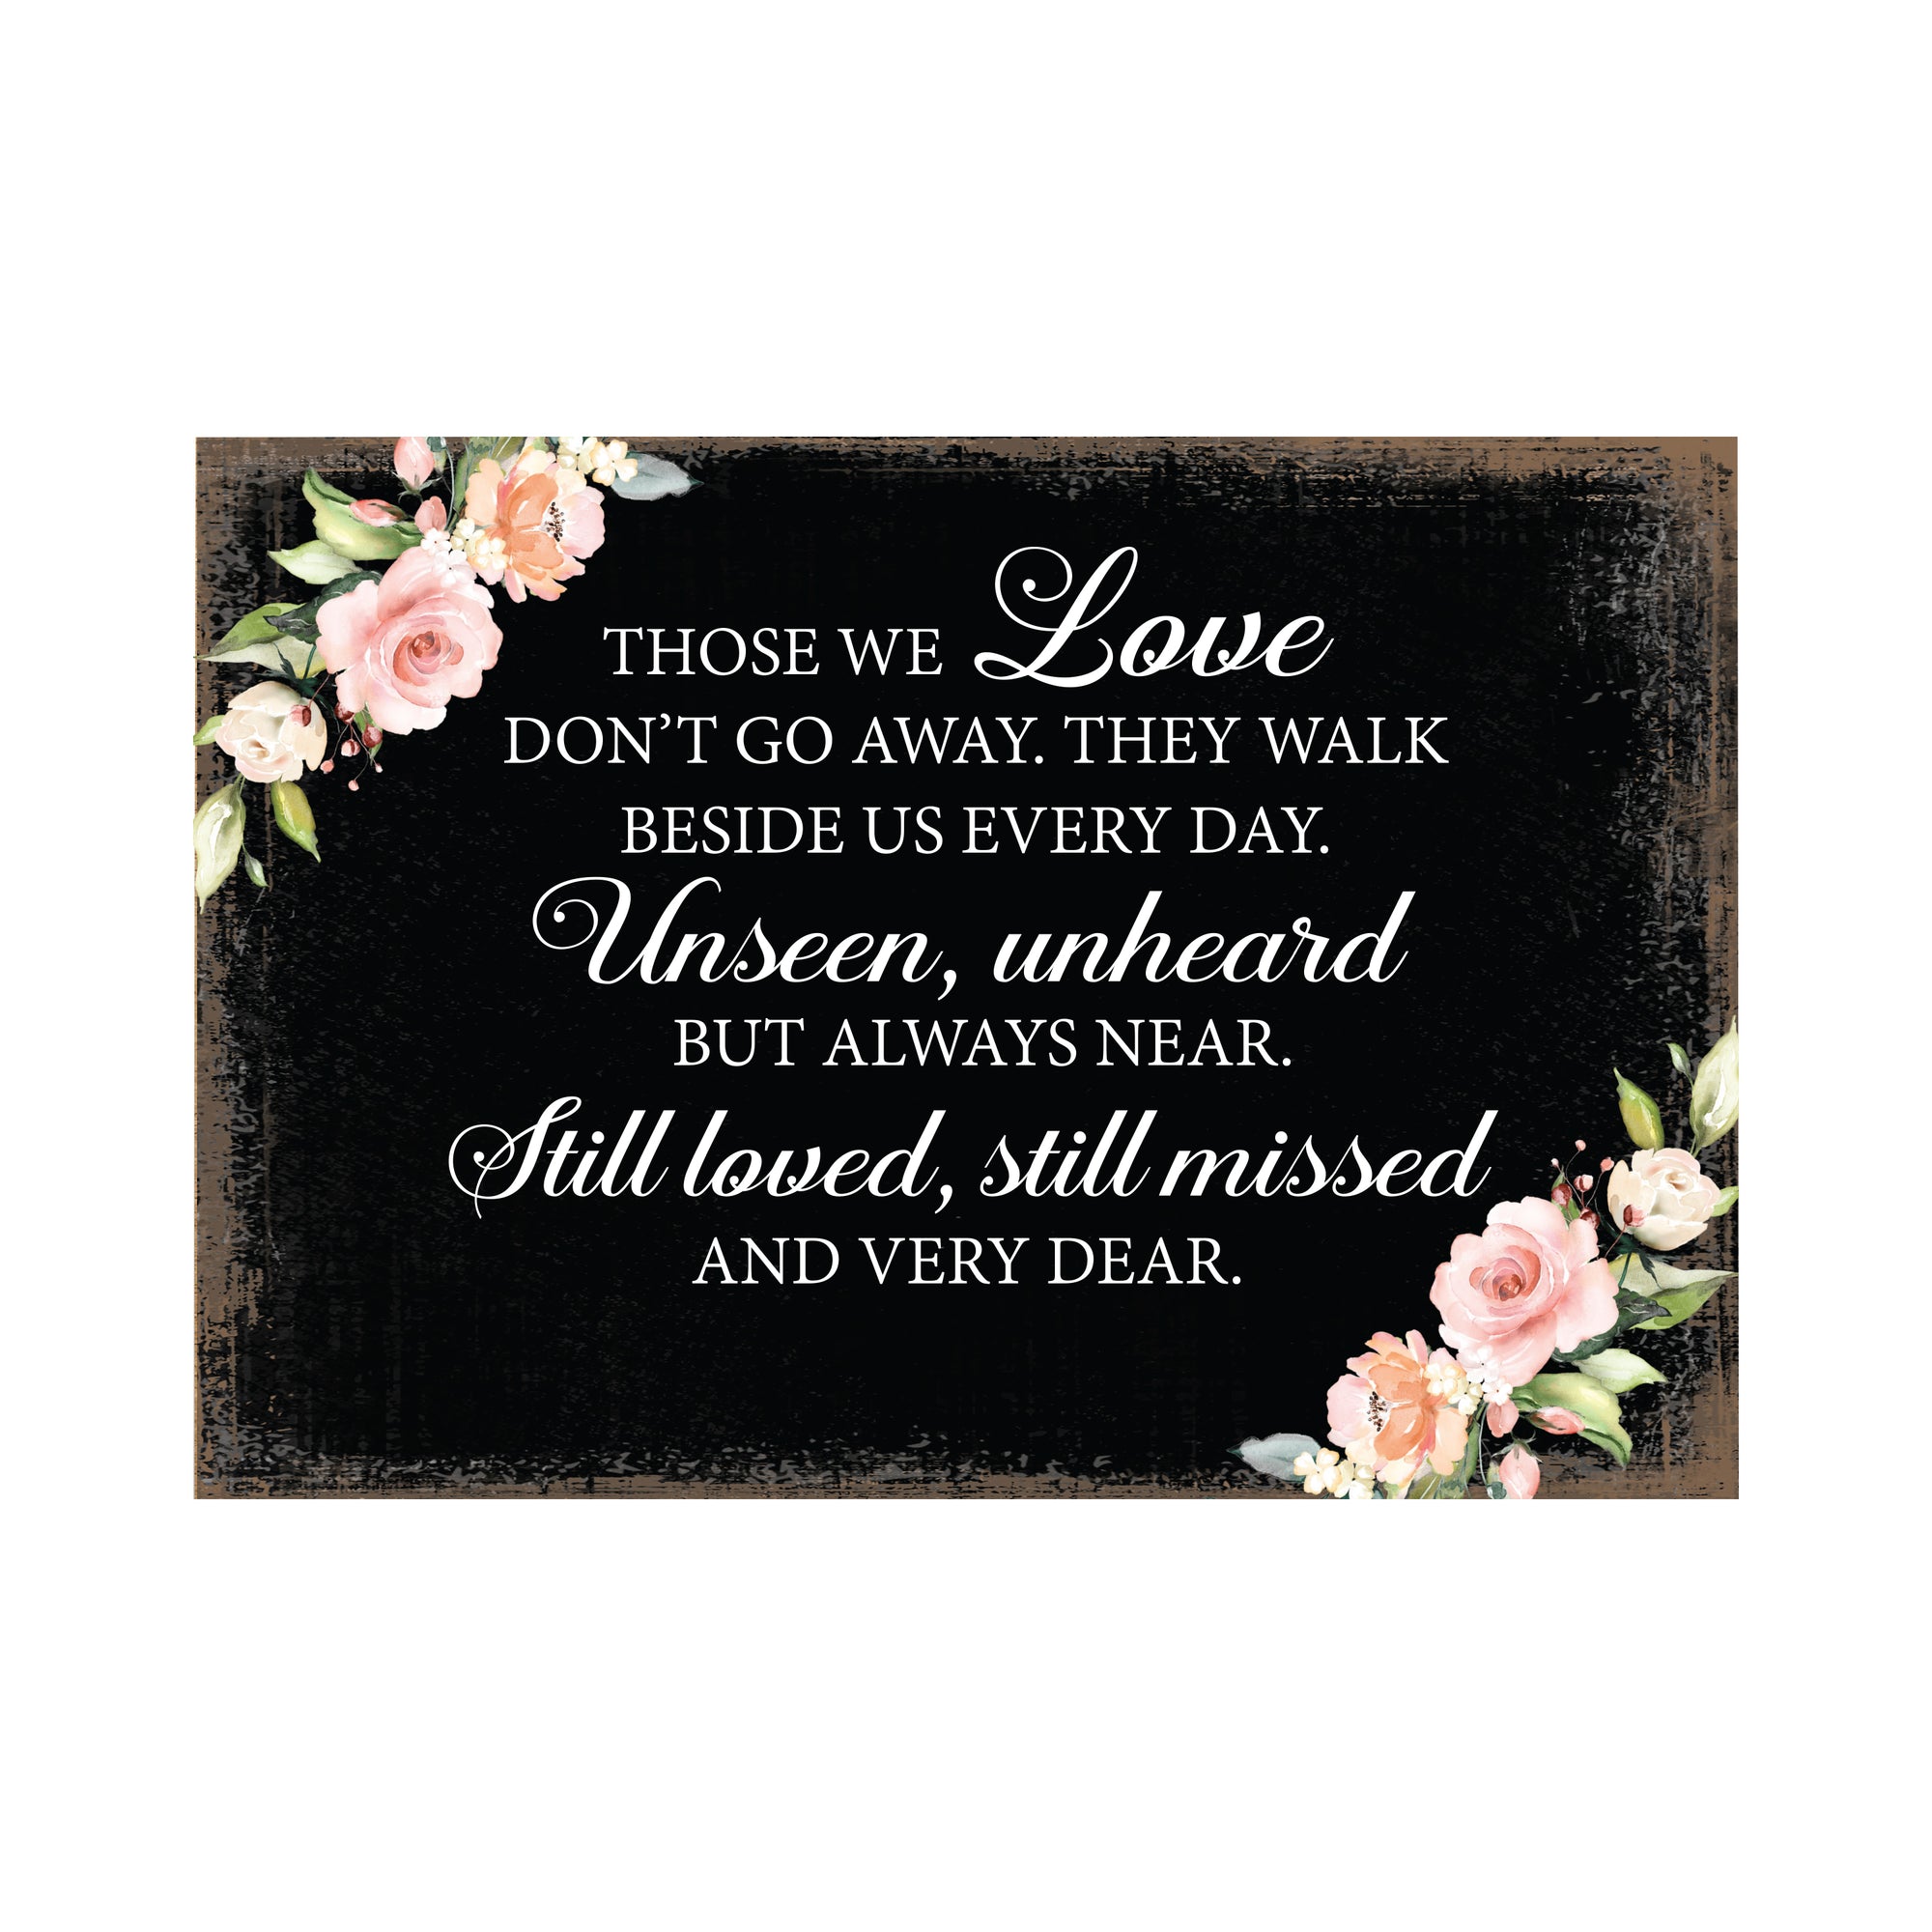 Those We Love Don’t Go Wooden Floral 5.5x8 Inches Memorial Art Sign Table Top and shelf decor For Home Décor